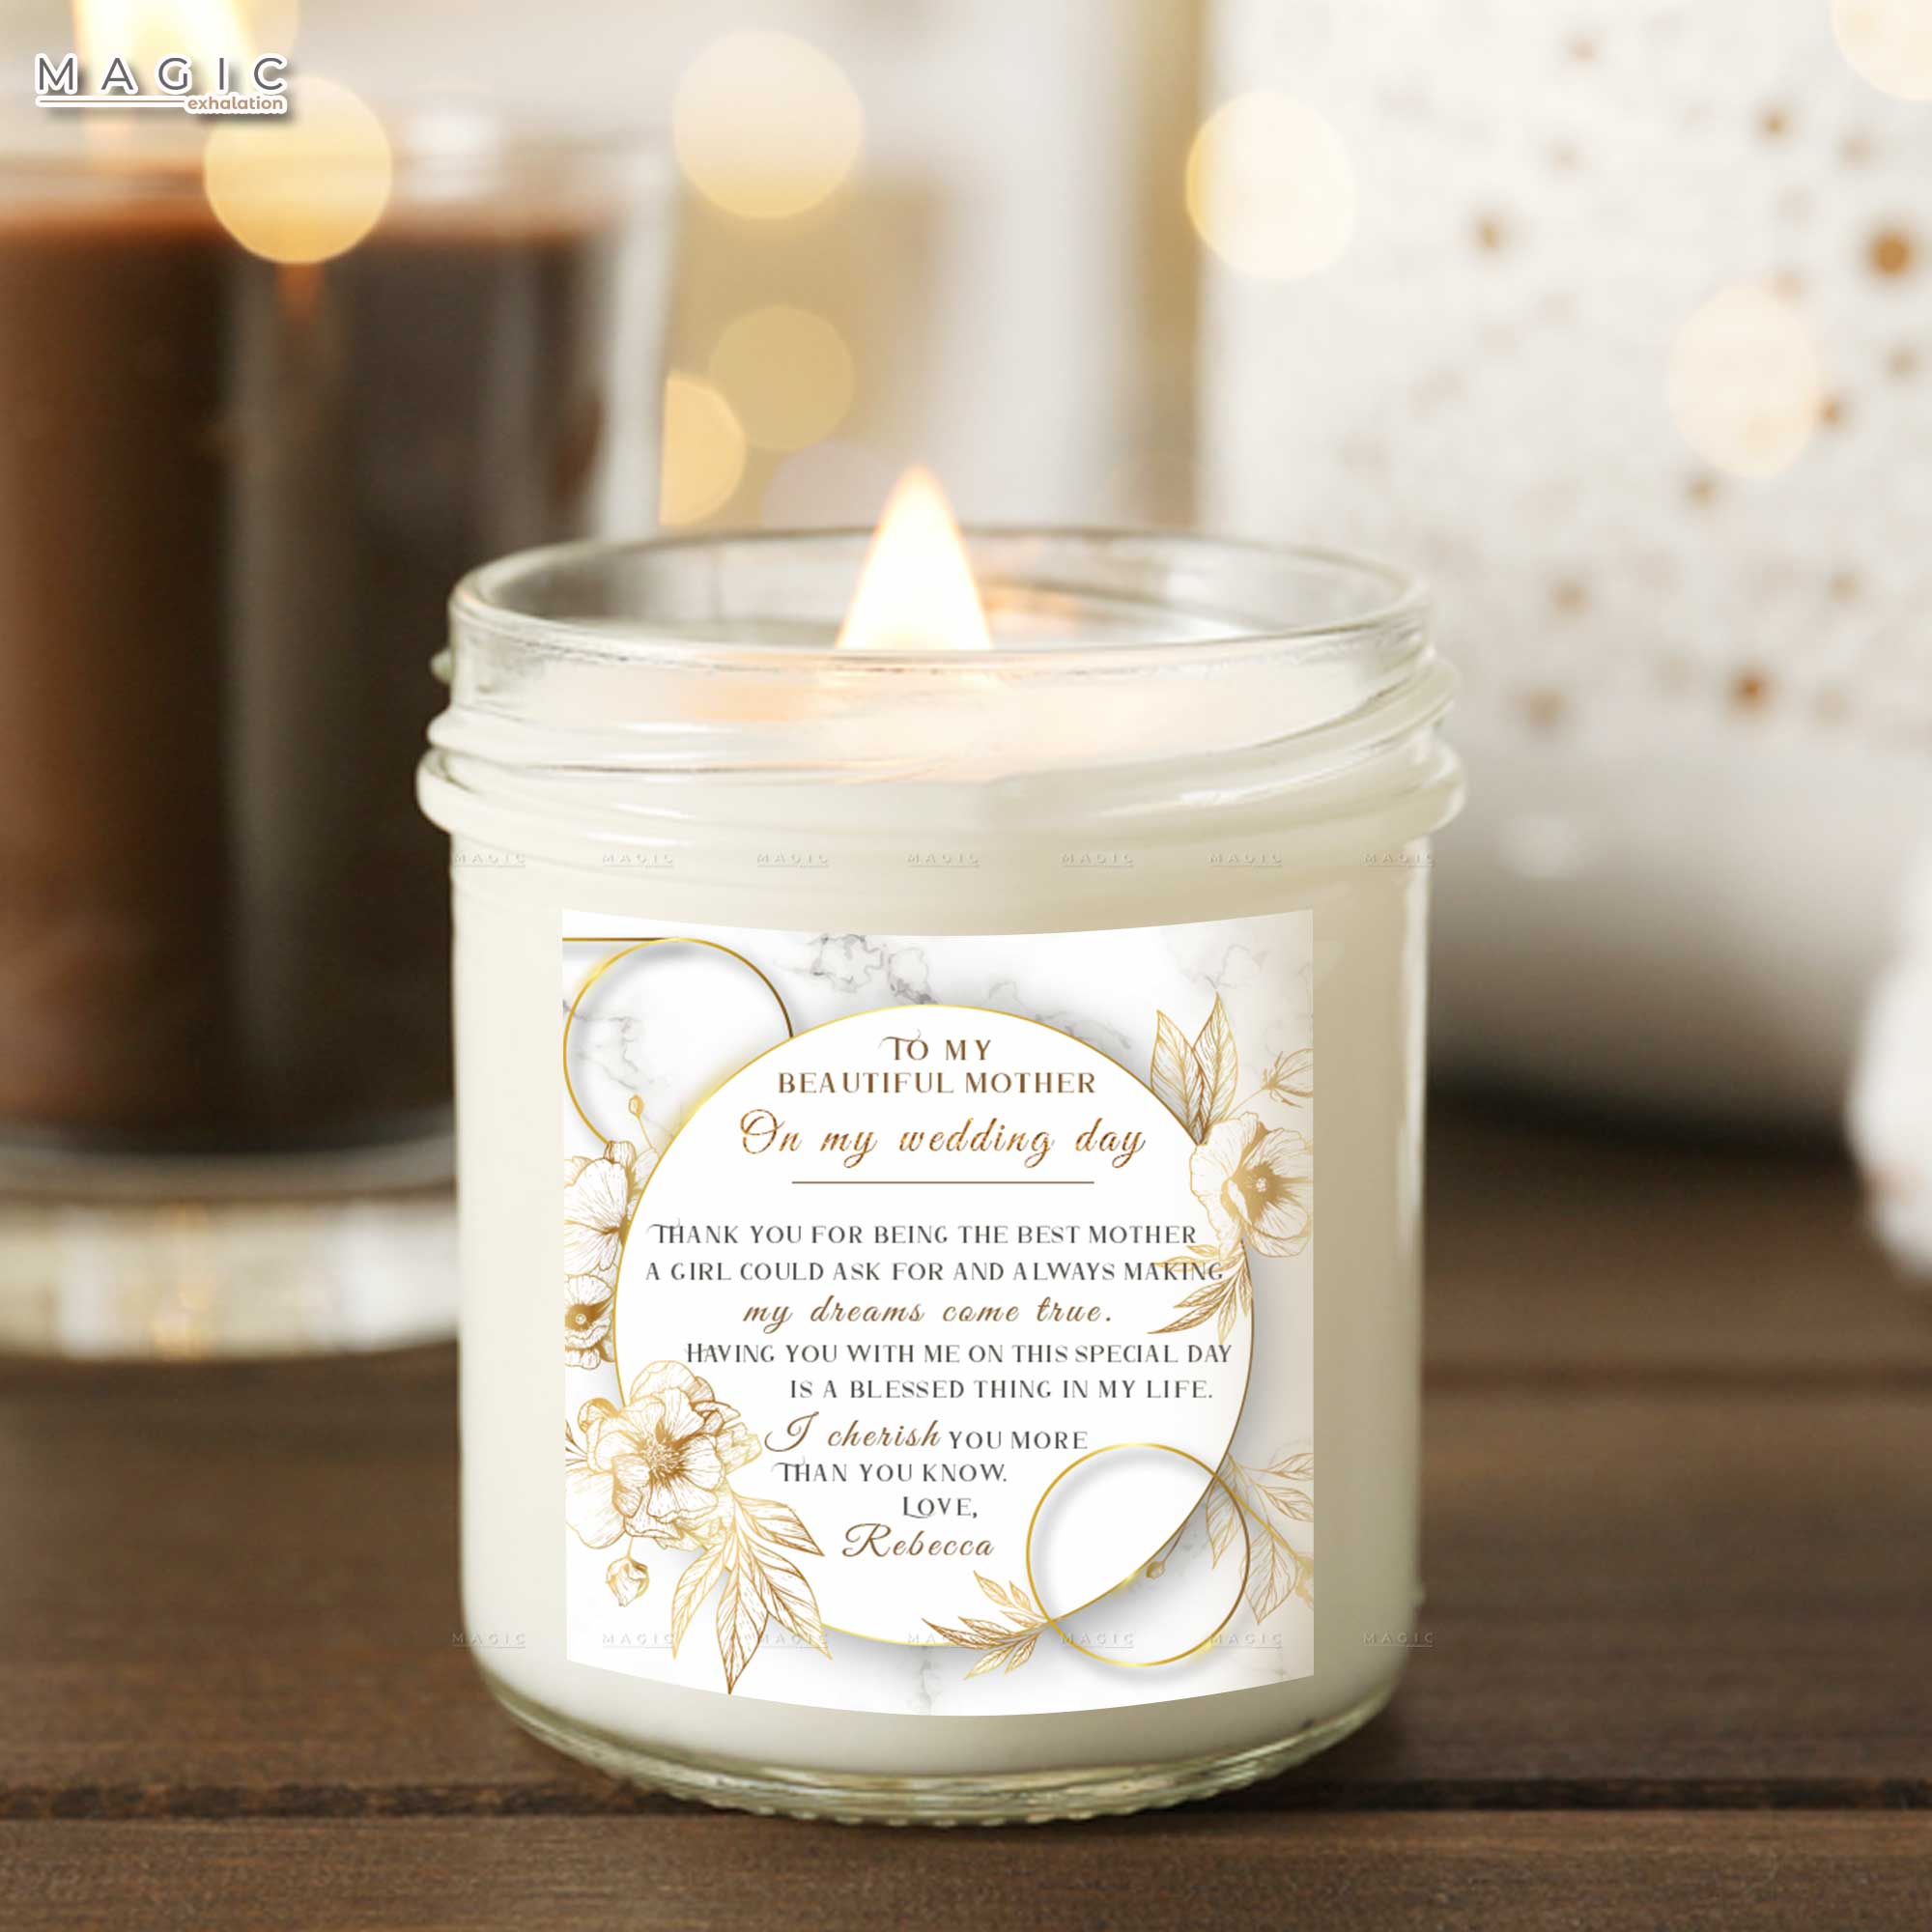 Wedding Mother Of The Bride Candle Gift, Personalized Gift For Parents Of The Bride, Gift For Mom On Wedding Day, Candles Scented Vanilla Soy Wax Candle